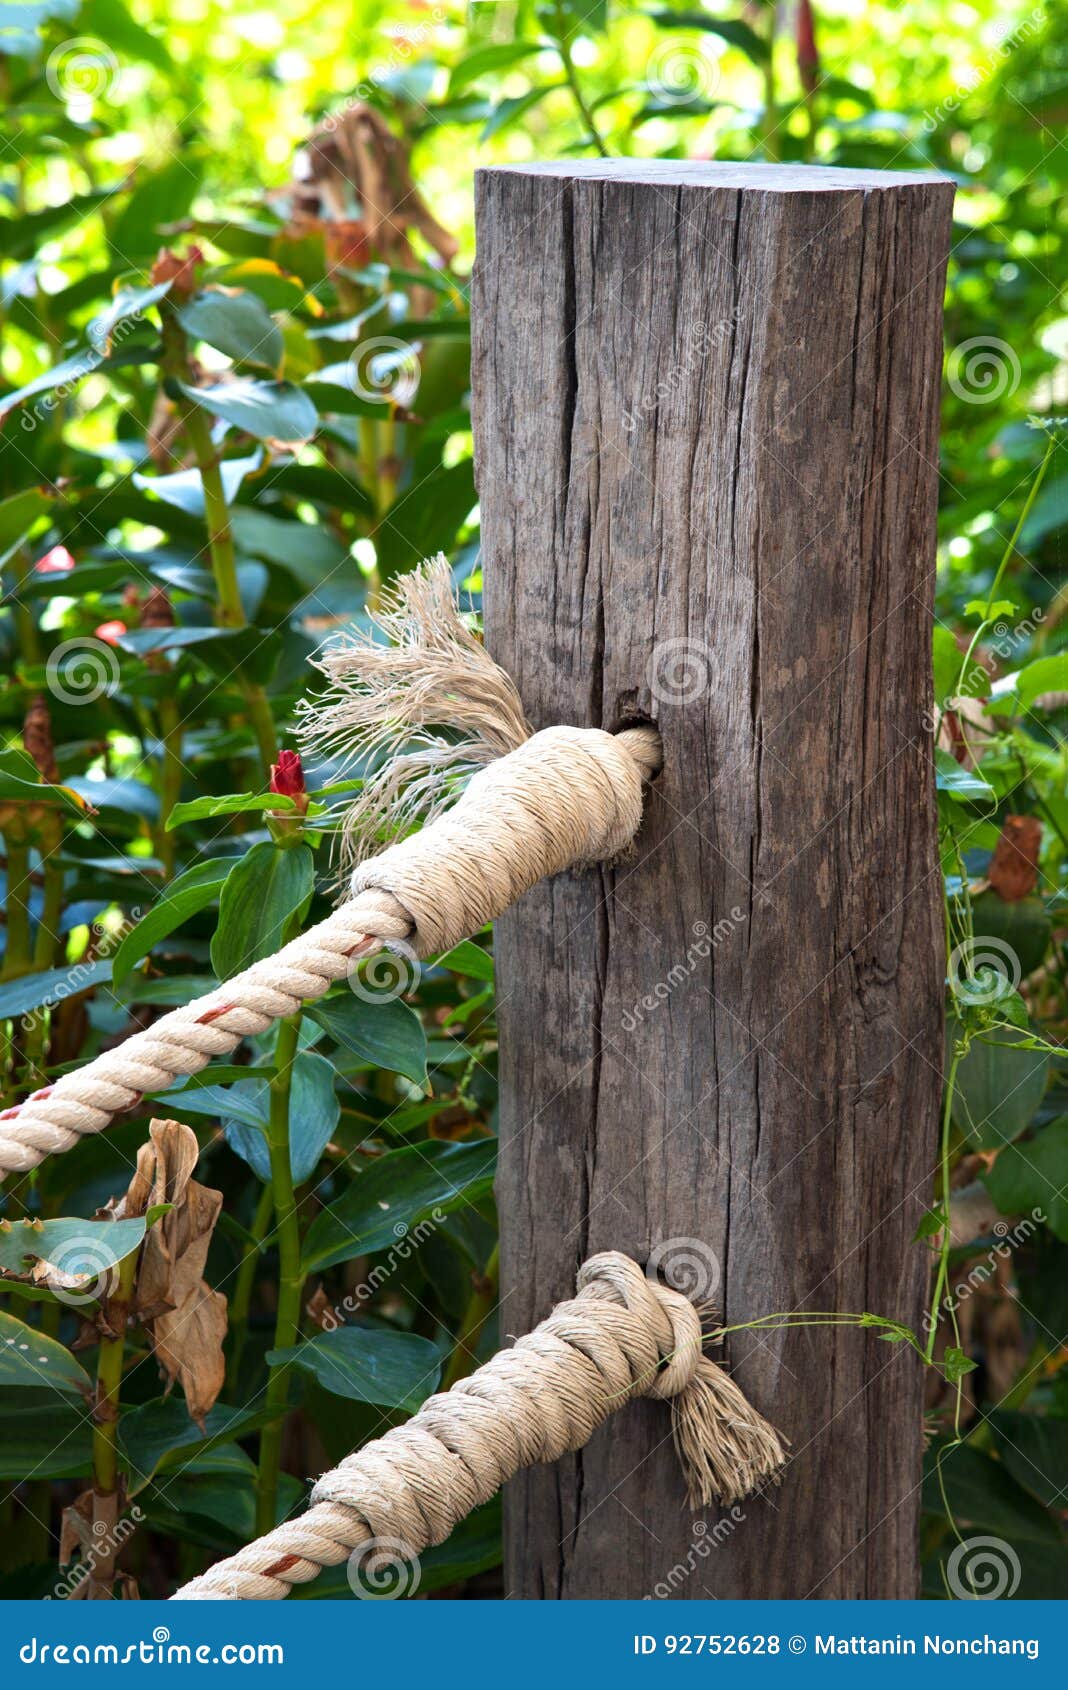 Wooden fence and knot rope stock photo. Image of garden - 92752628